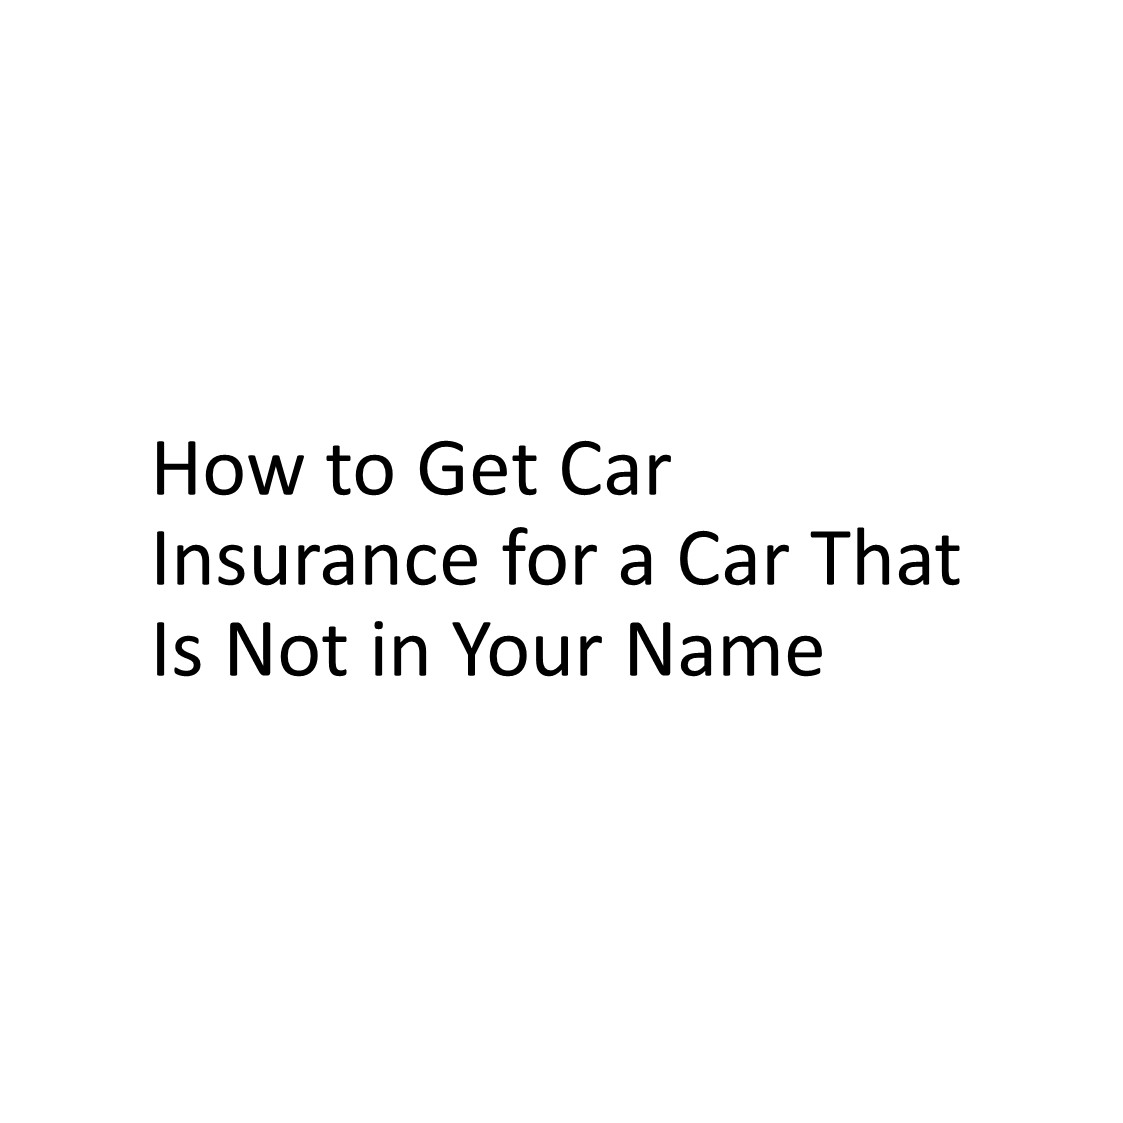 How to Get Car Insurance for a Car That Is Not in Your Name